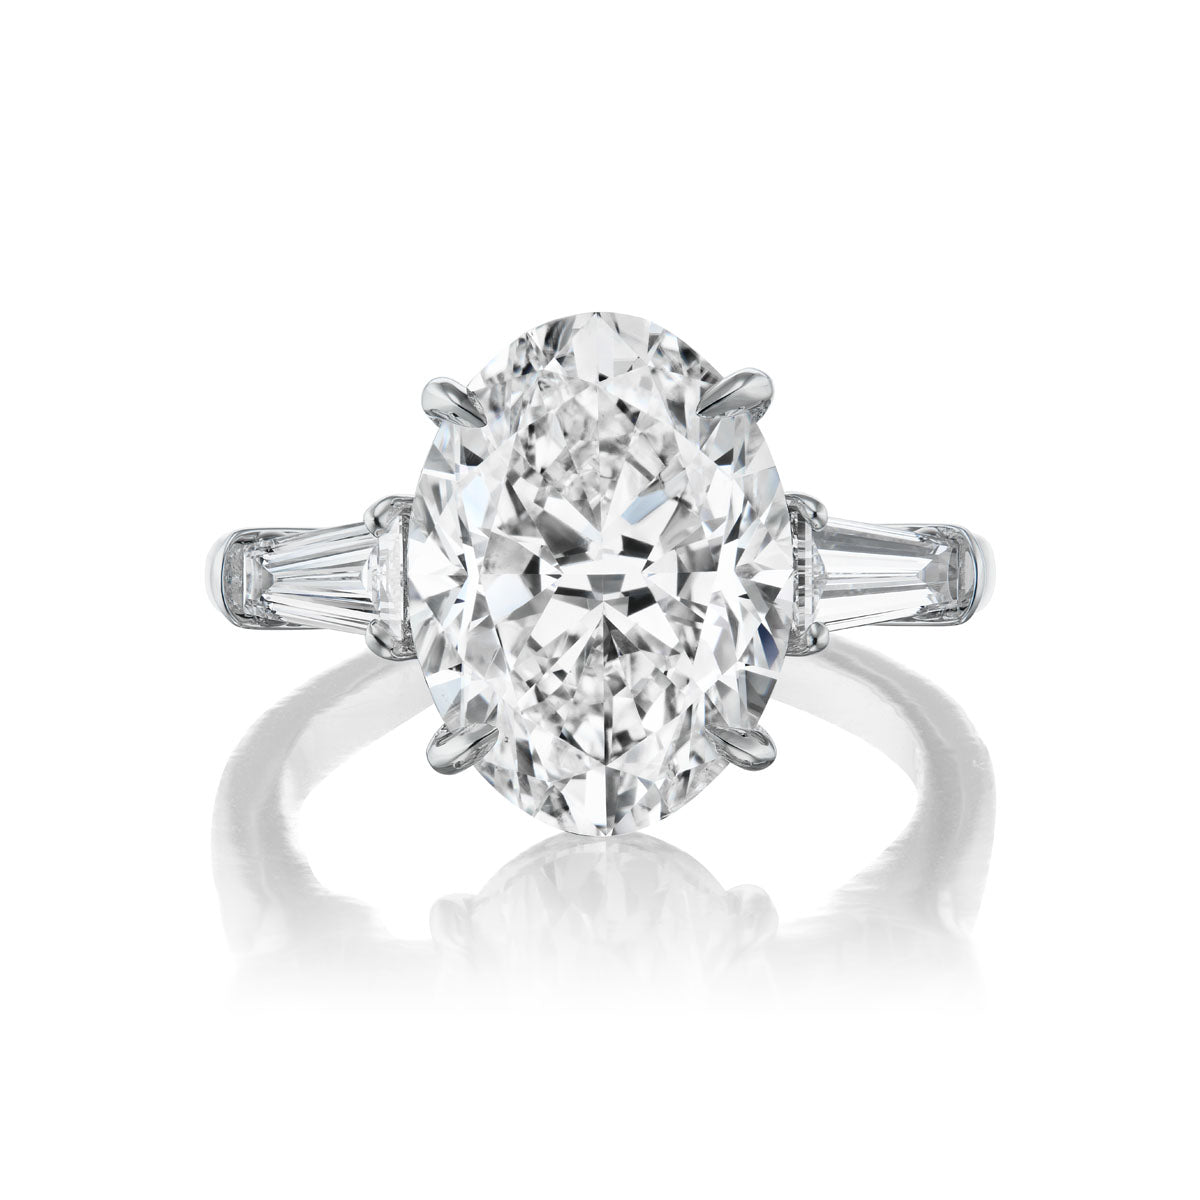 Oval Diamond Engagement Ring with Tapered Baguette Side Stones